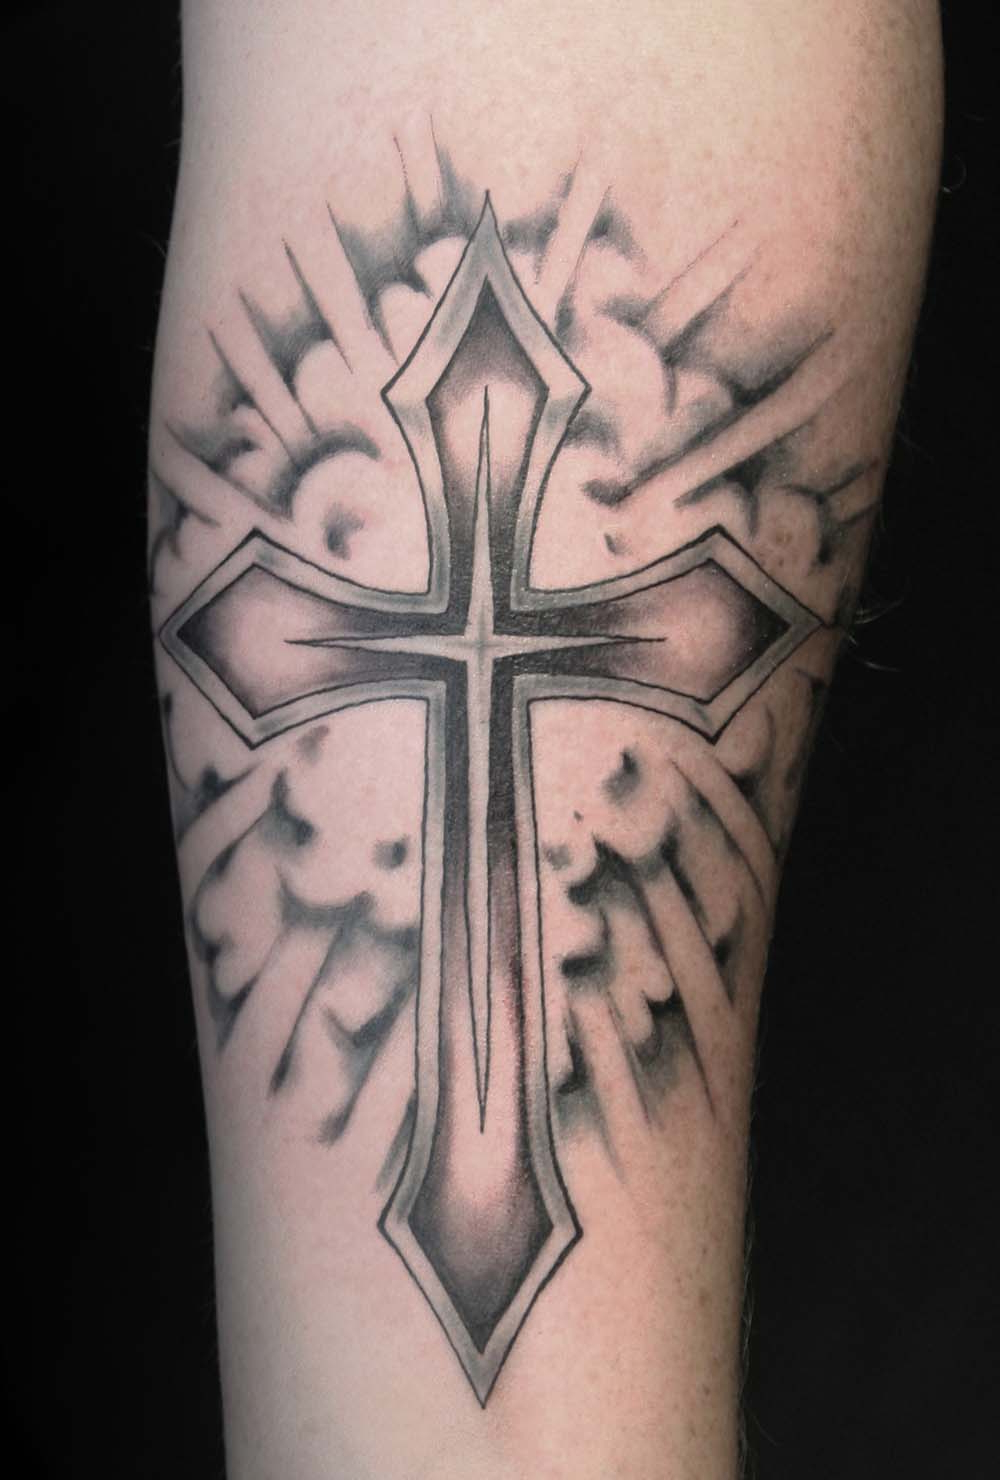 75 Unique Hottest Cross Tattoos Ideas Media Democracy with dimensions 1000 X 1480